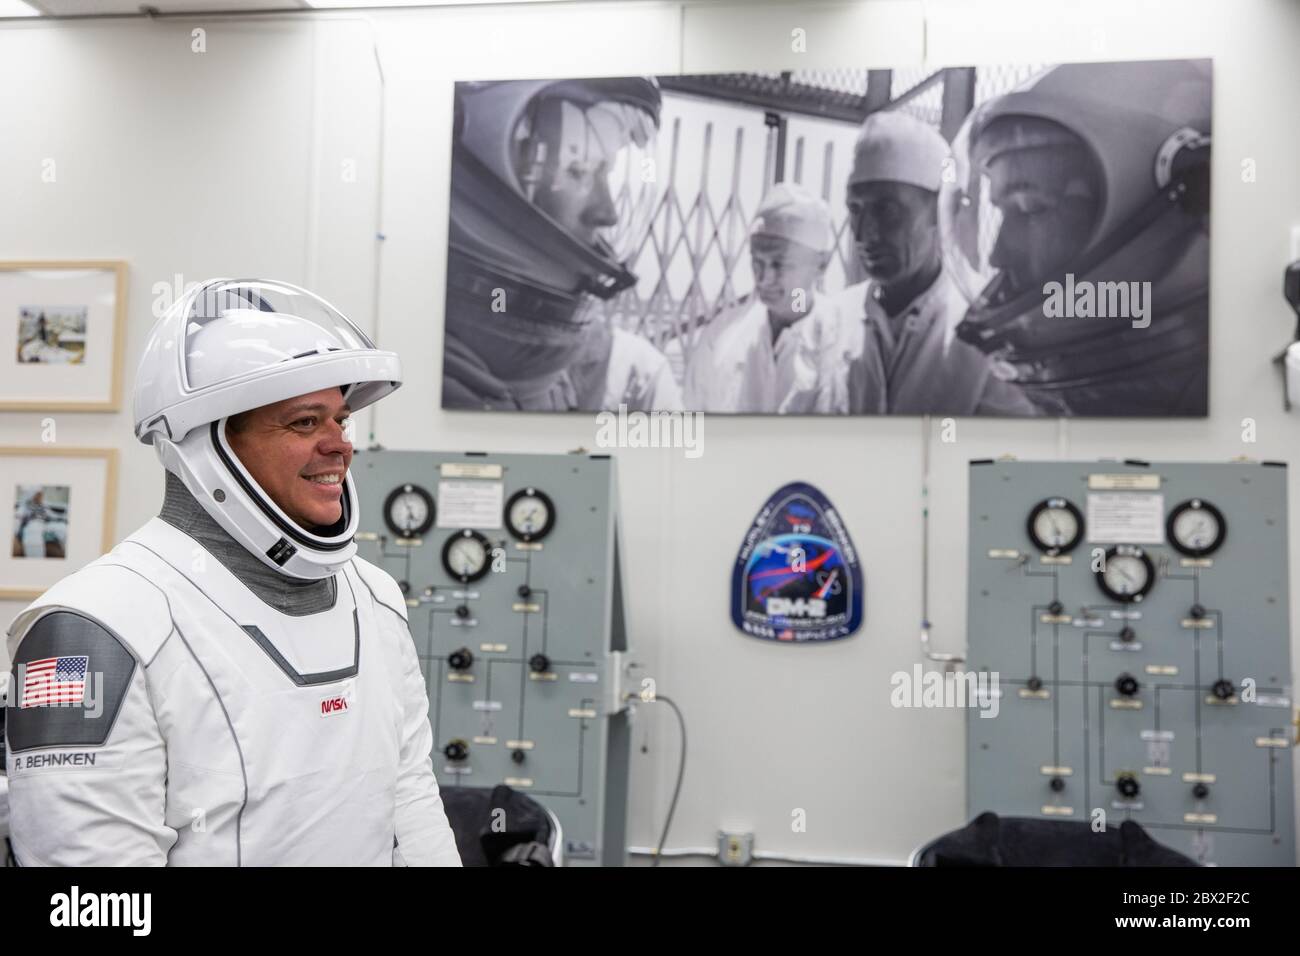 NASA astronaut Robert Behnken, smiles as he suits-up in his SpaceX spacesuit, in the ready room of the Neil Armstrong Operations and Checkout Building at the Kennedy Space Center May 30, 2020 Cape Canaveral, in Florida. The astronauts Behnken and Hurley will make a second attempt at launch in the first commercial launch carrying astronauts to the International Space Station. Stock Photo